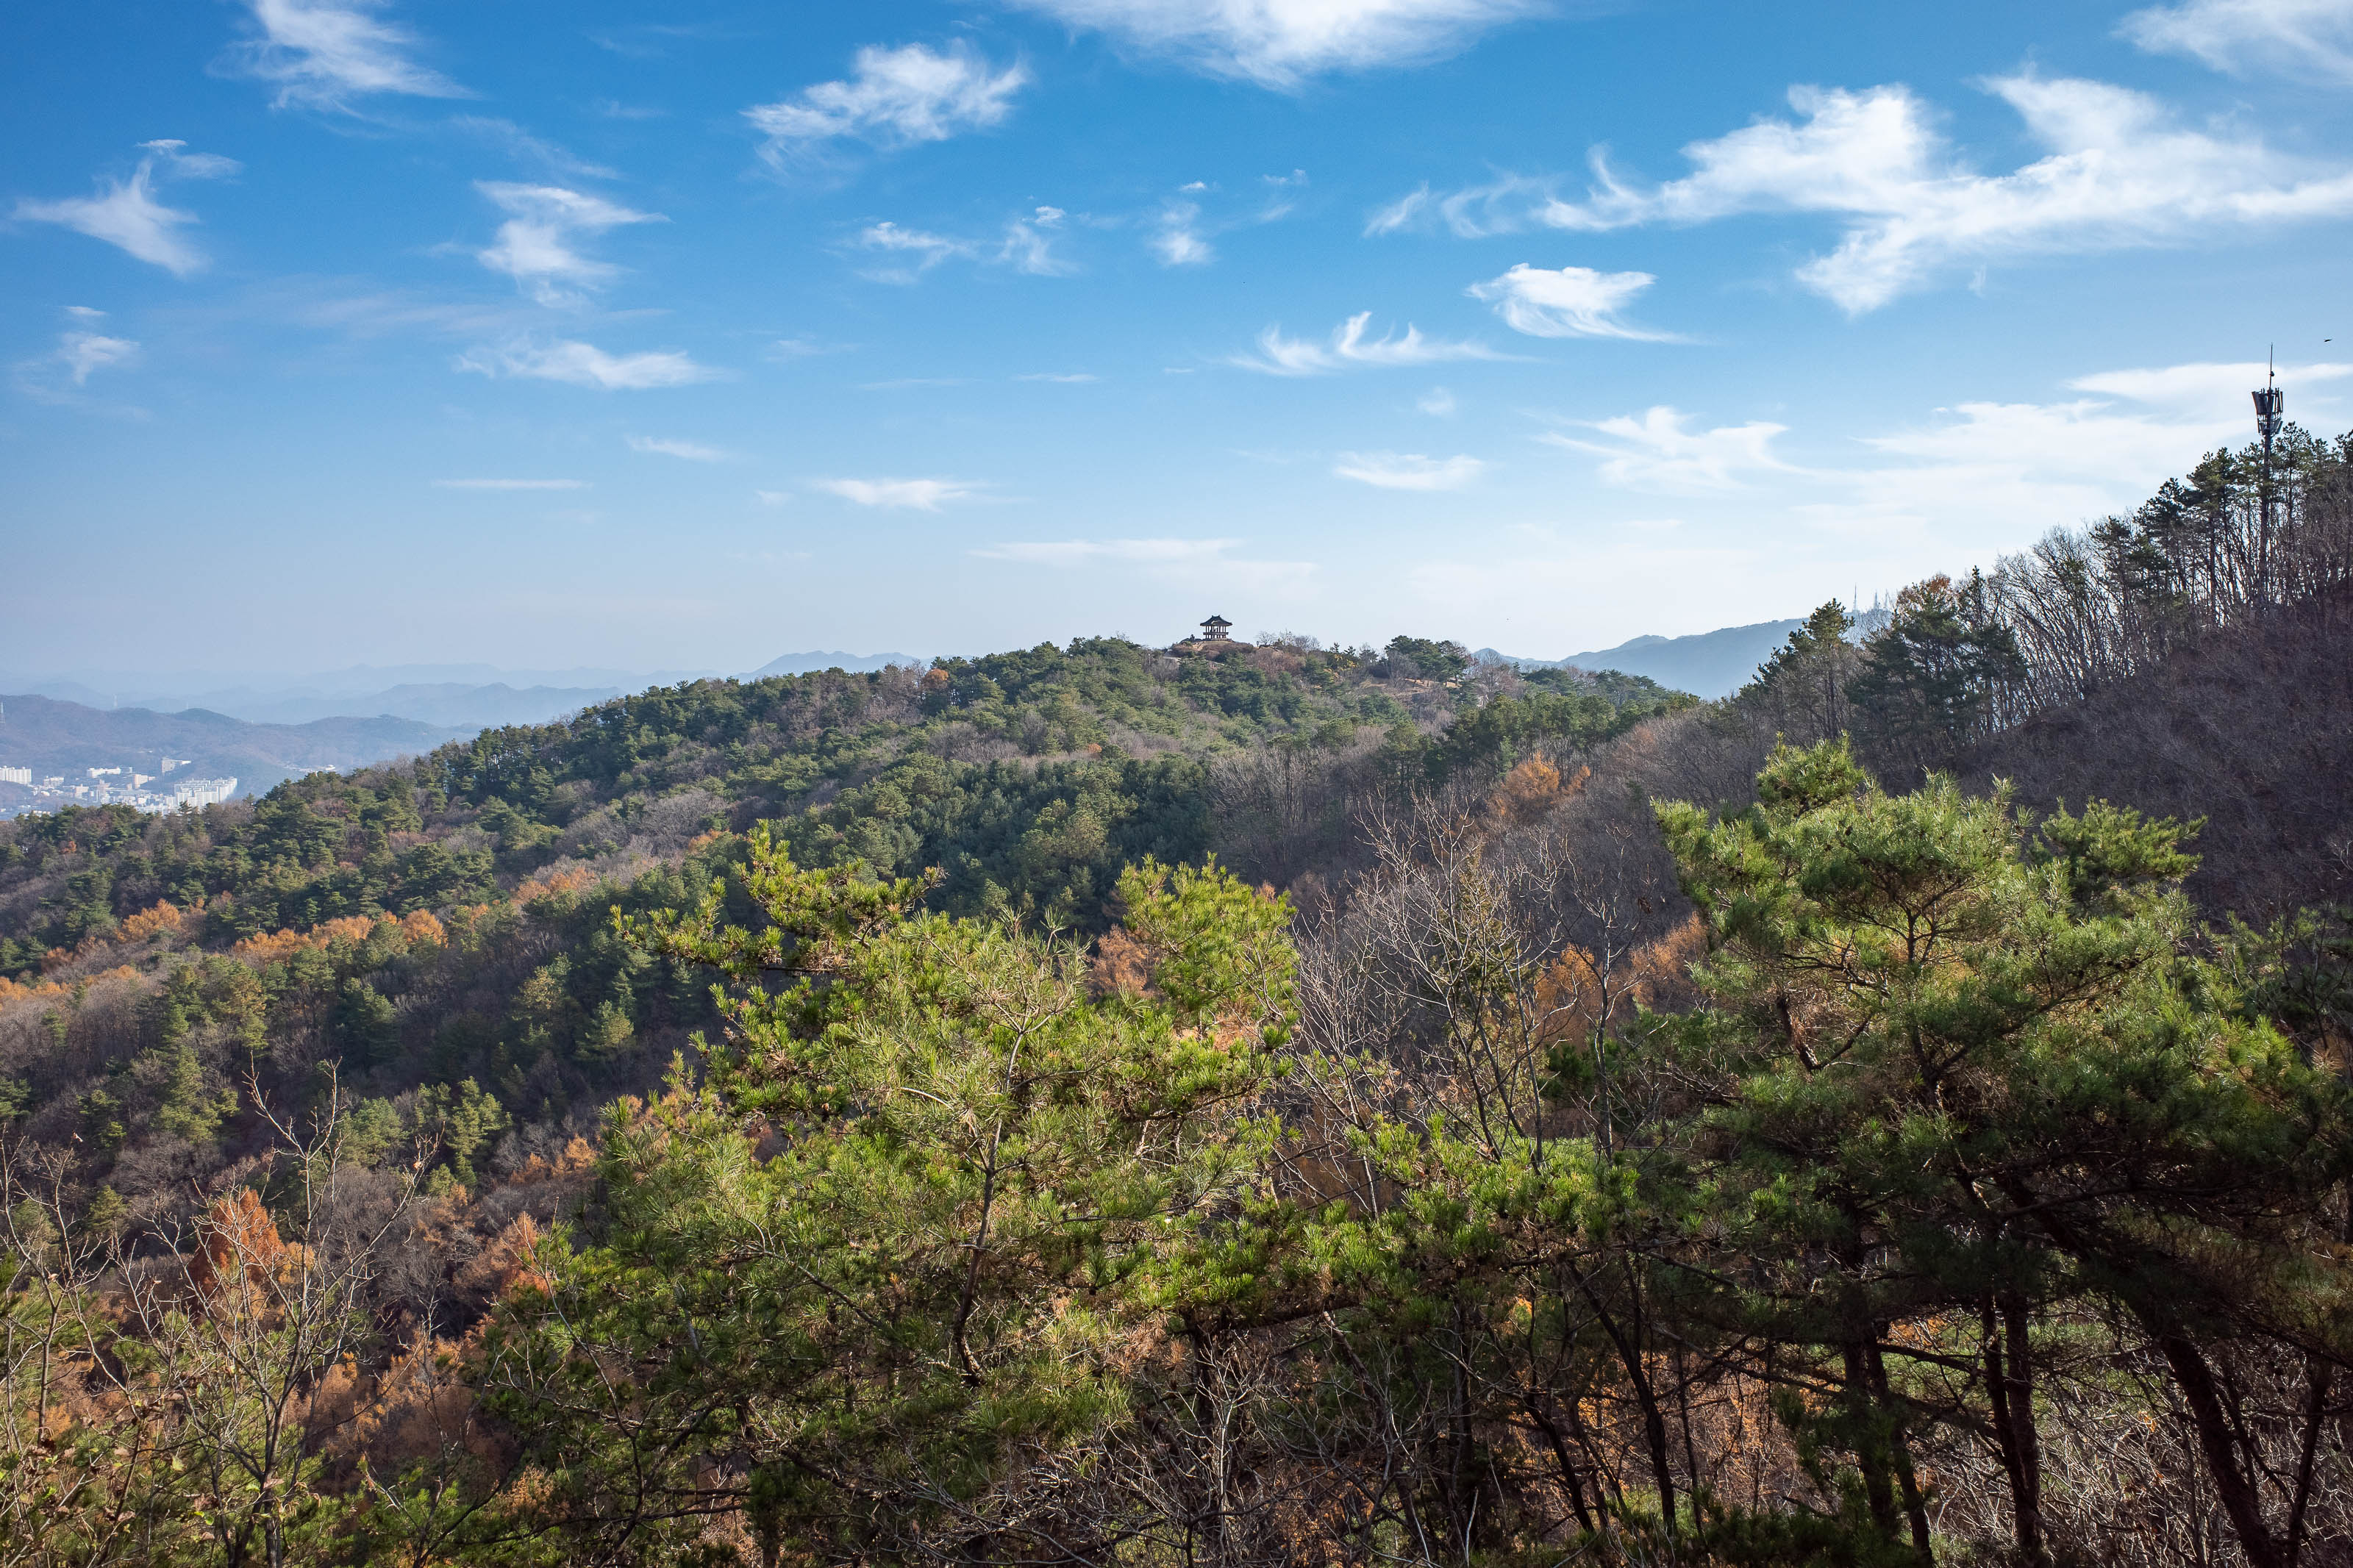 Korean-Hiking-Daejeon-Bomunsan - My next target is that little pagoda over there.